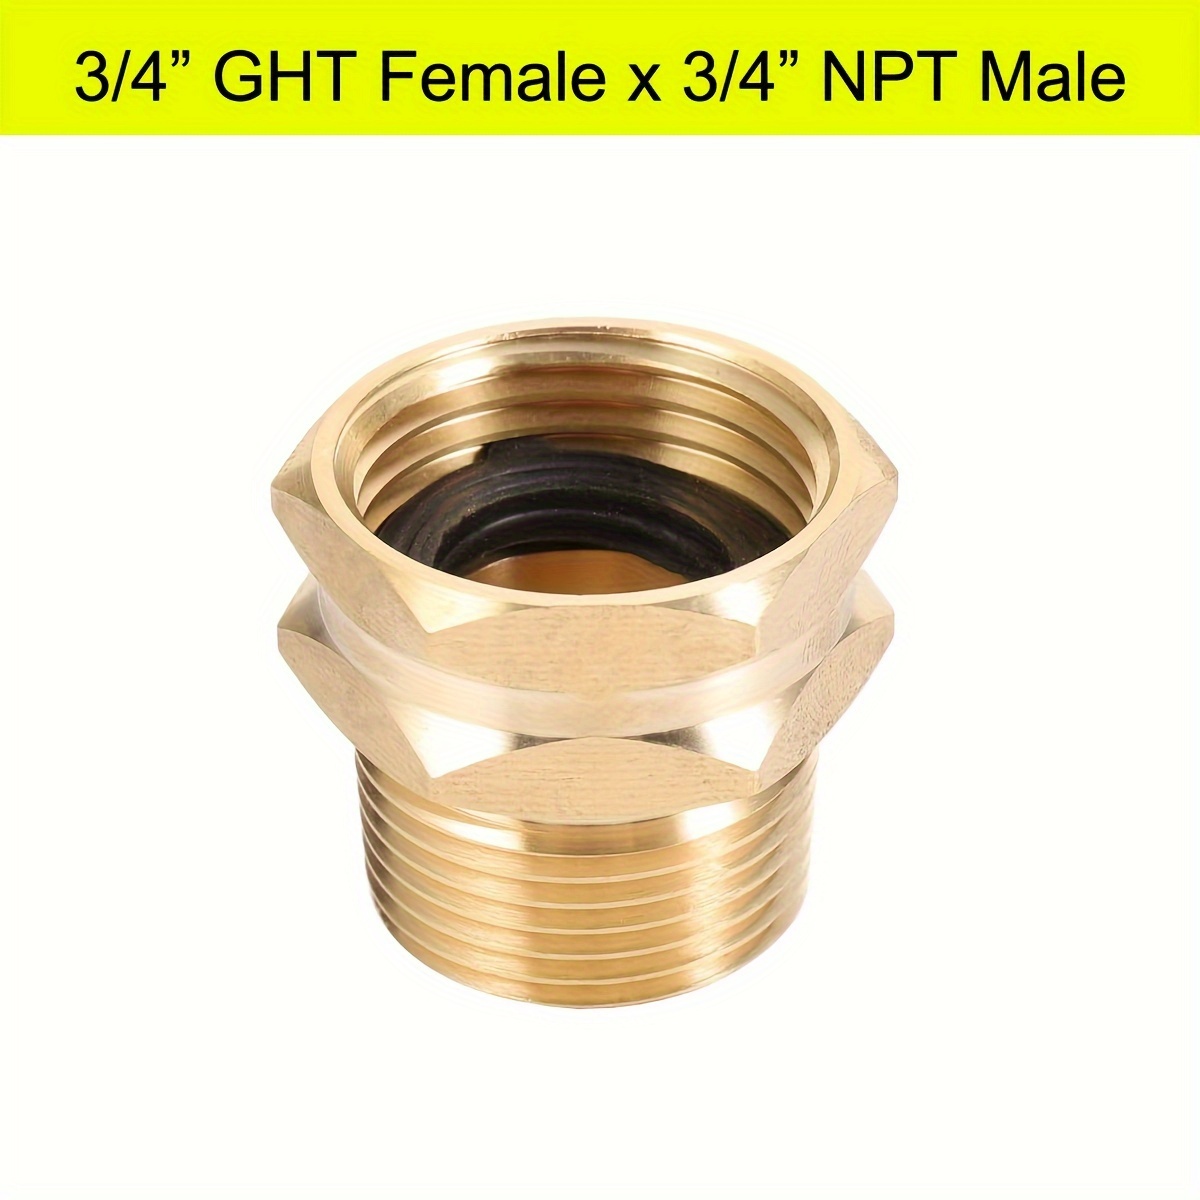 2pcs, Brass Garden Hose Adapter, 3/4 GHT Female X 3/4 Male Connector, GHT  To NPT Adapter Brass Fitting, Plants Water System With Adjustable Control